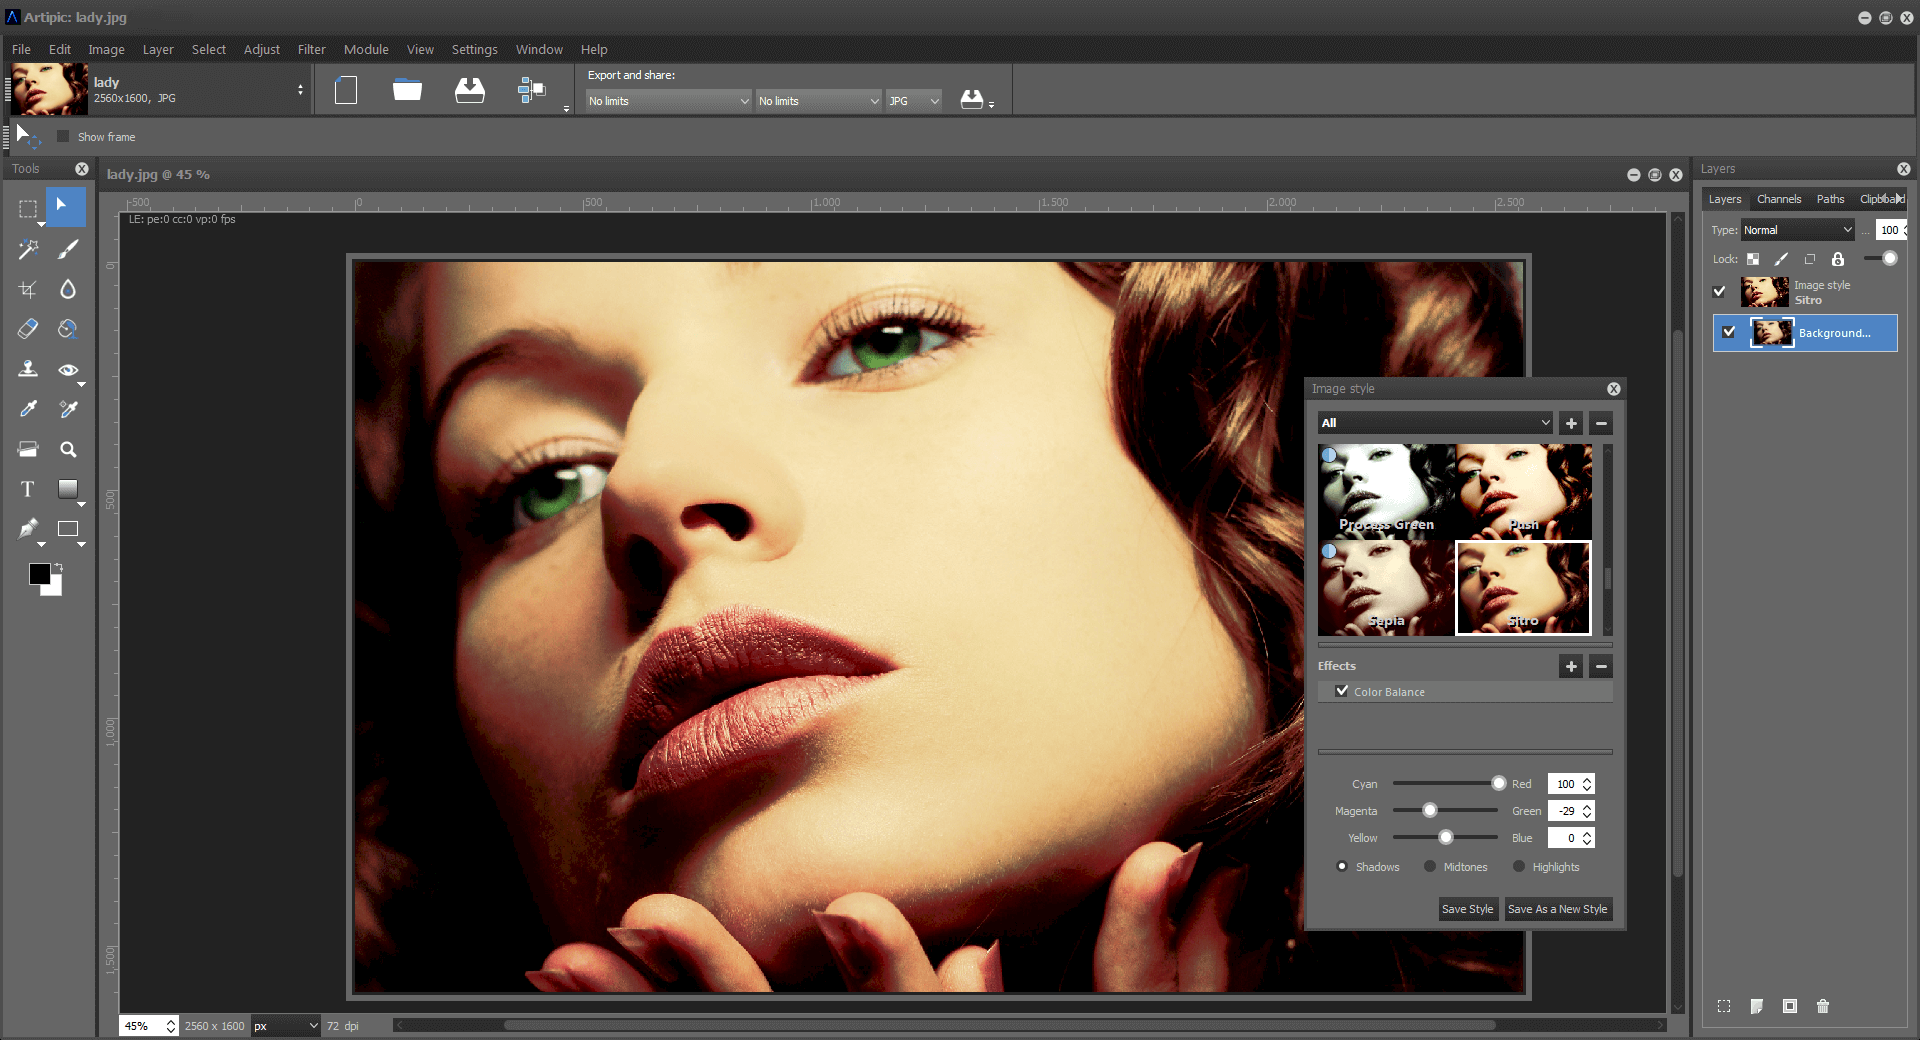 Image editing with a variety of tools